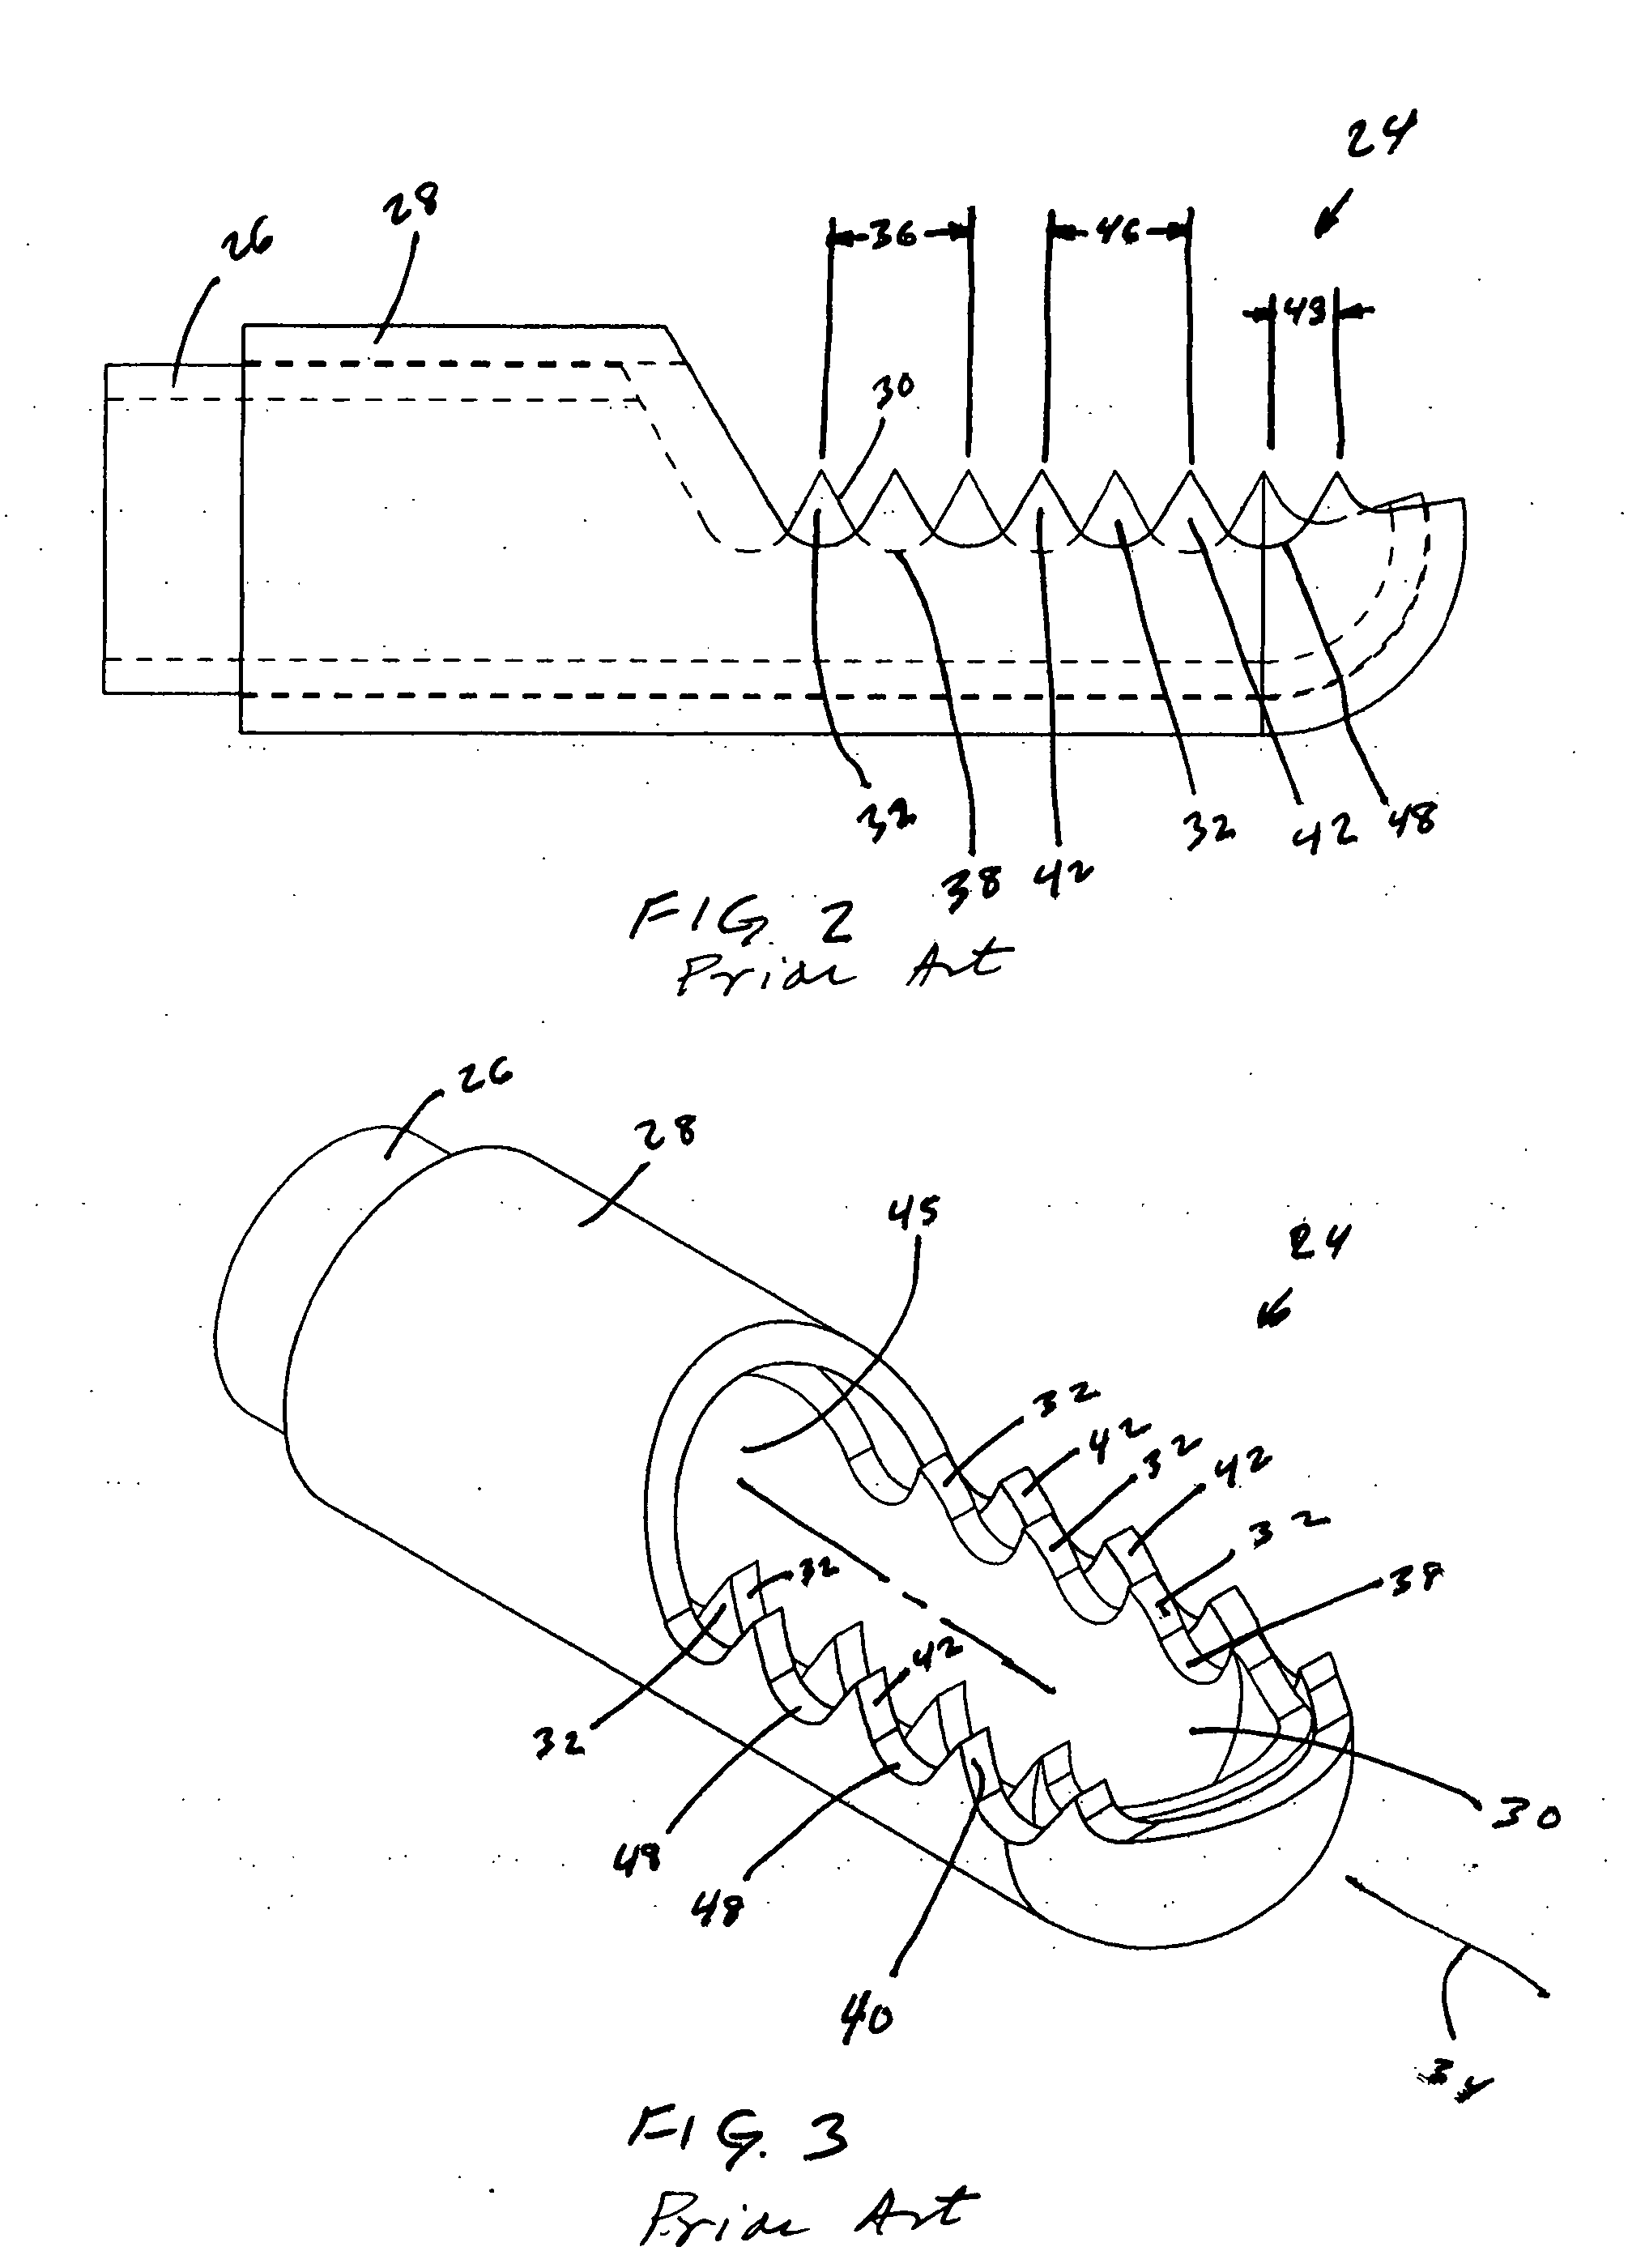 Arthroscopic shaver with two pass inner blade and method of manufacturing same